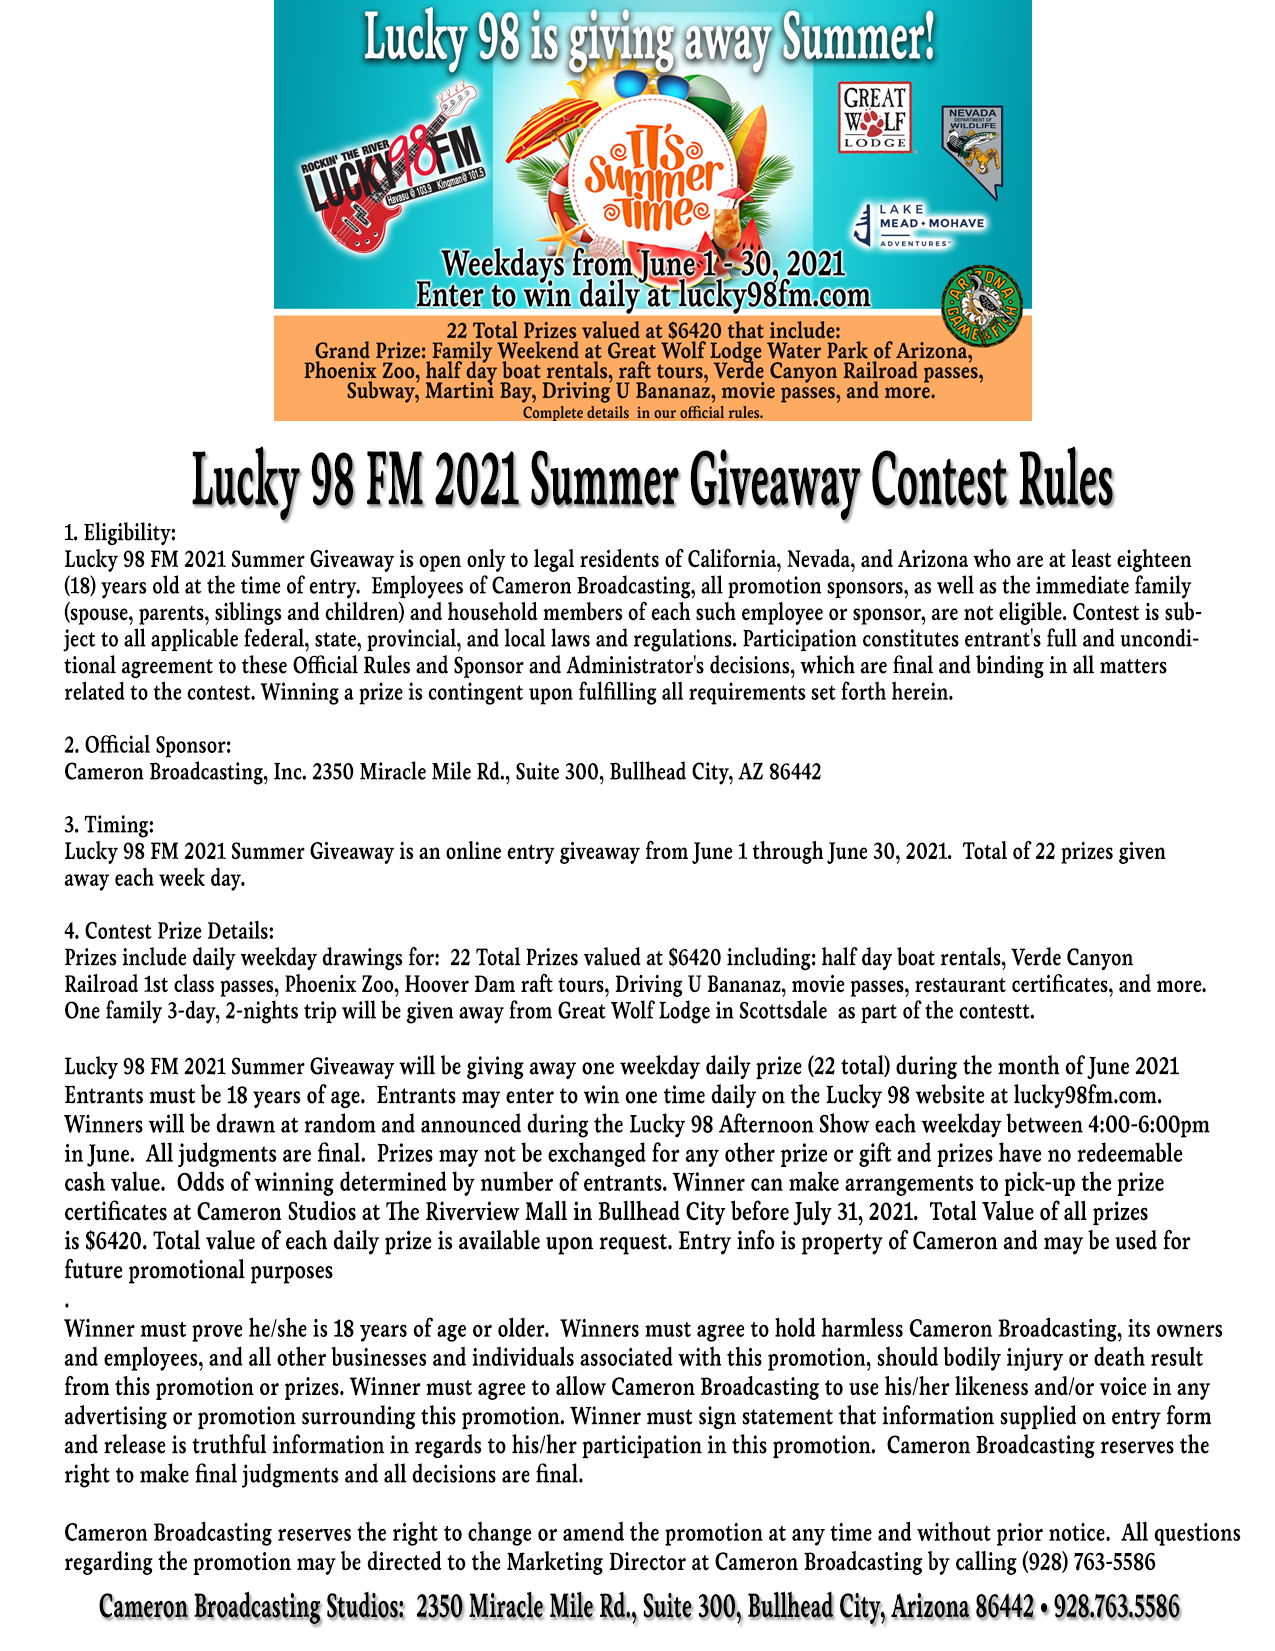 Lucky 98 FM 2021 Summer Giveaway Contest Rules